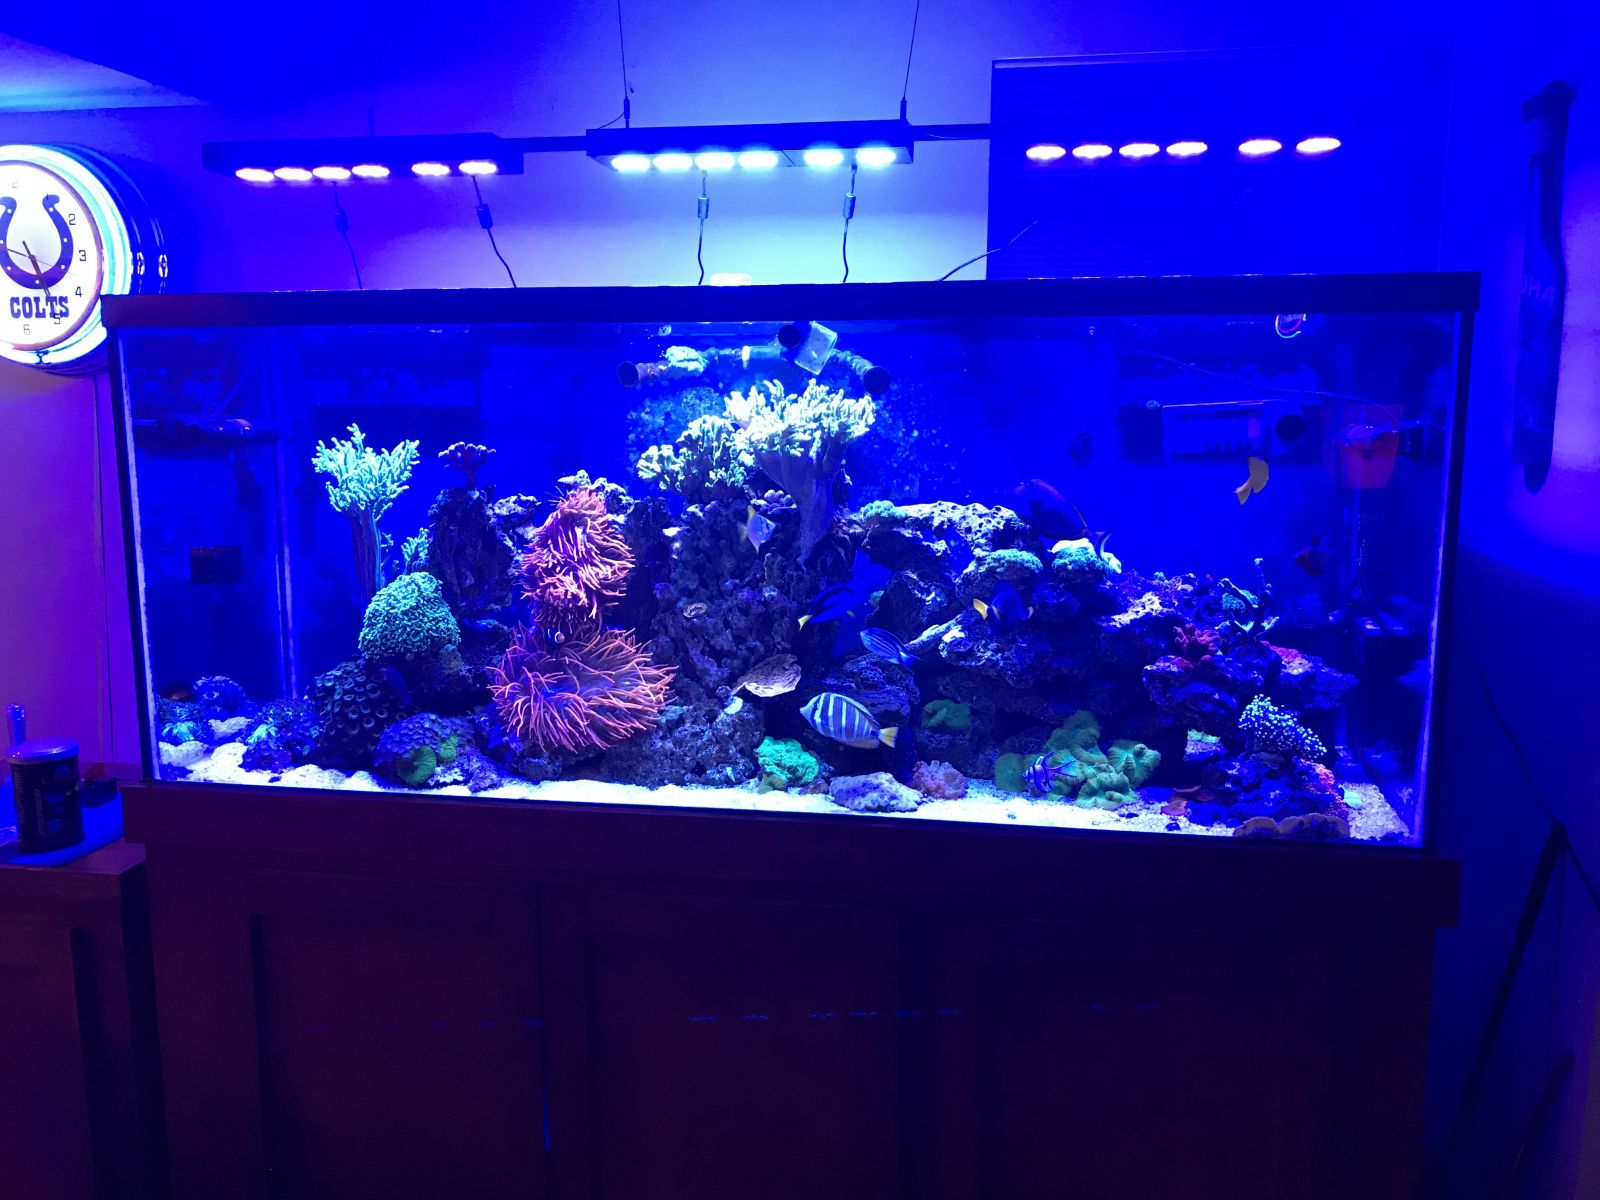 220G Mixed Reef 2 years after set up